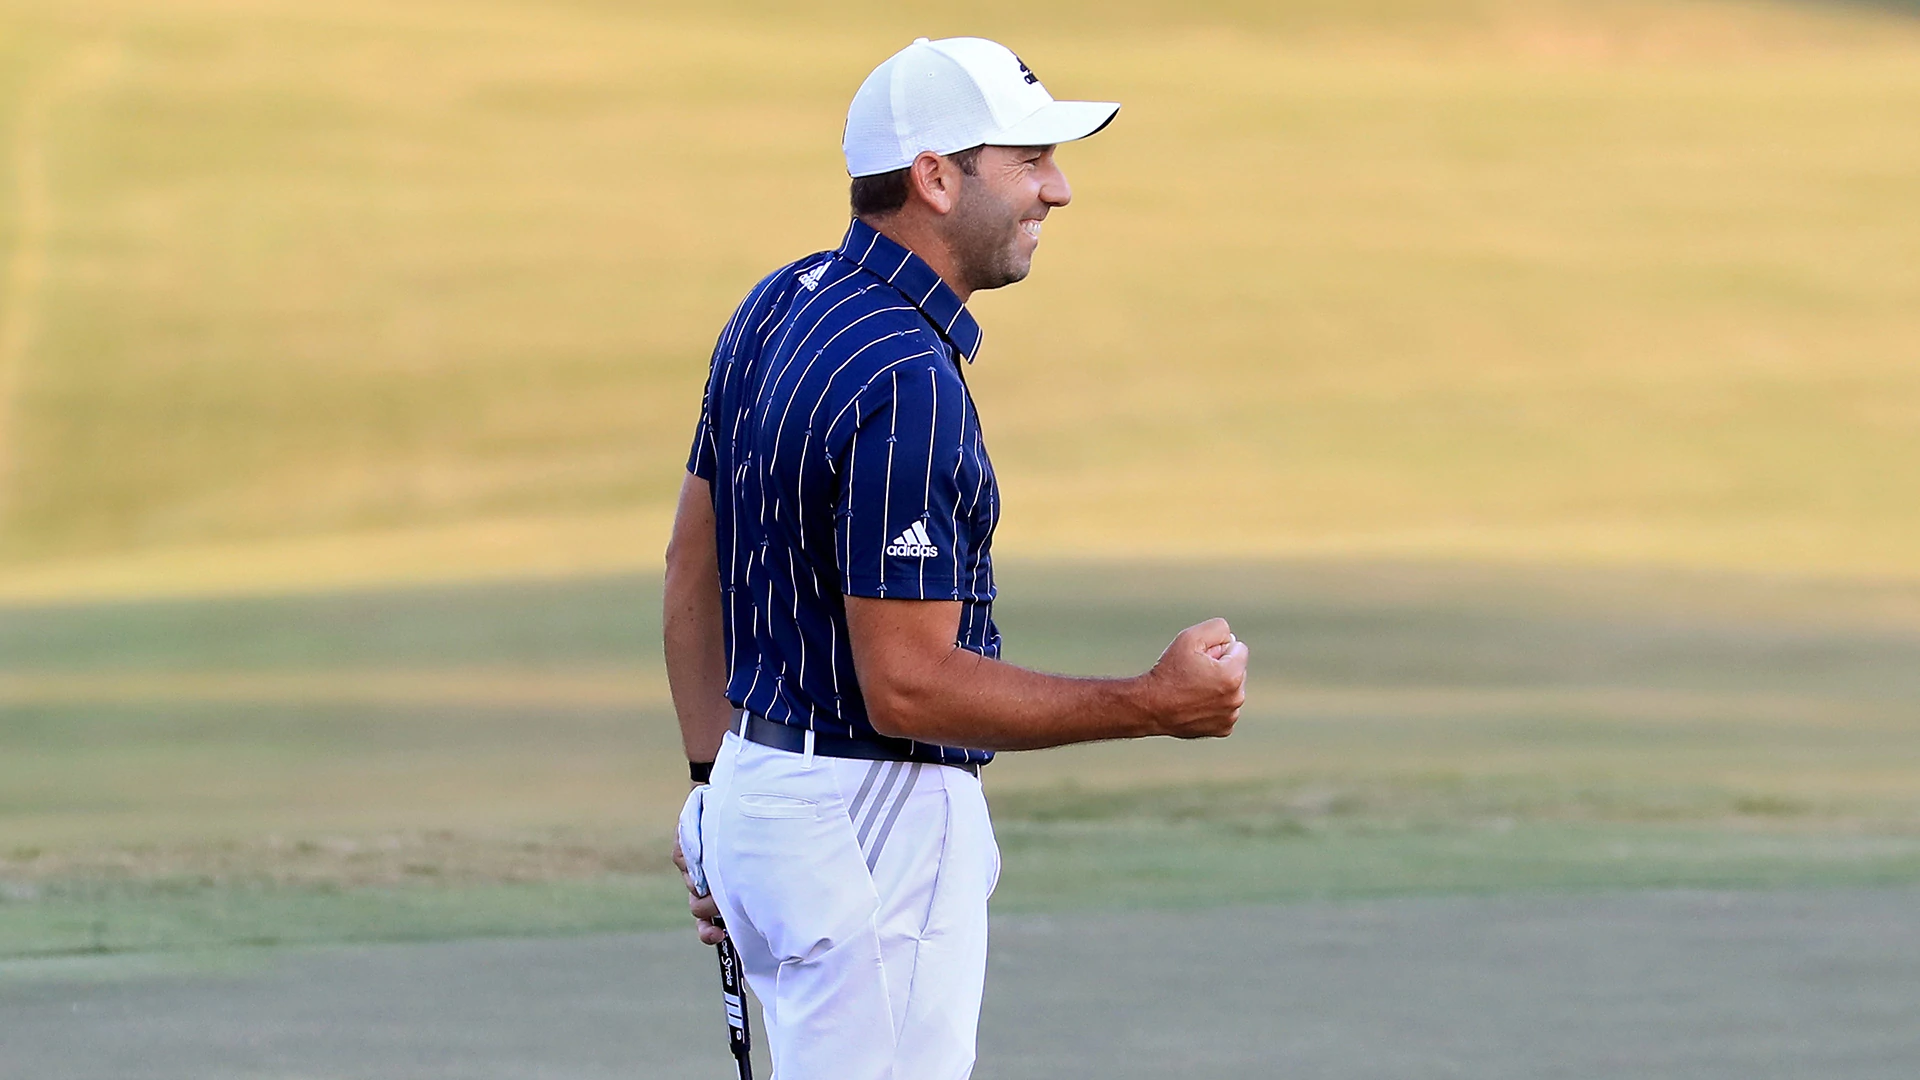 Final birdie gives Sergio Garcia title at Sanderson Farms, first Tour win since 2017 2